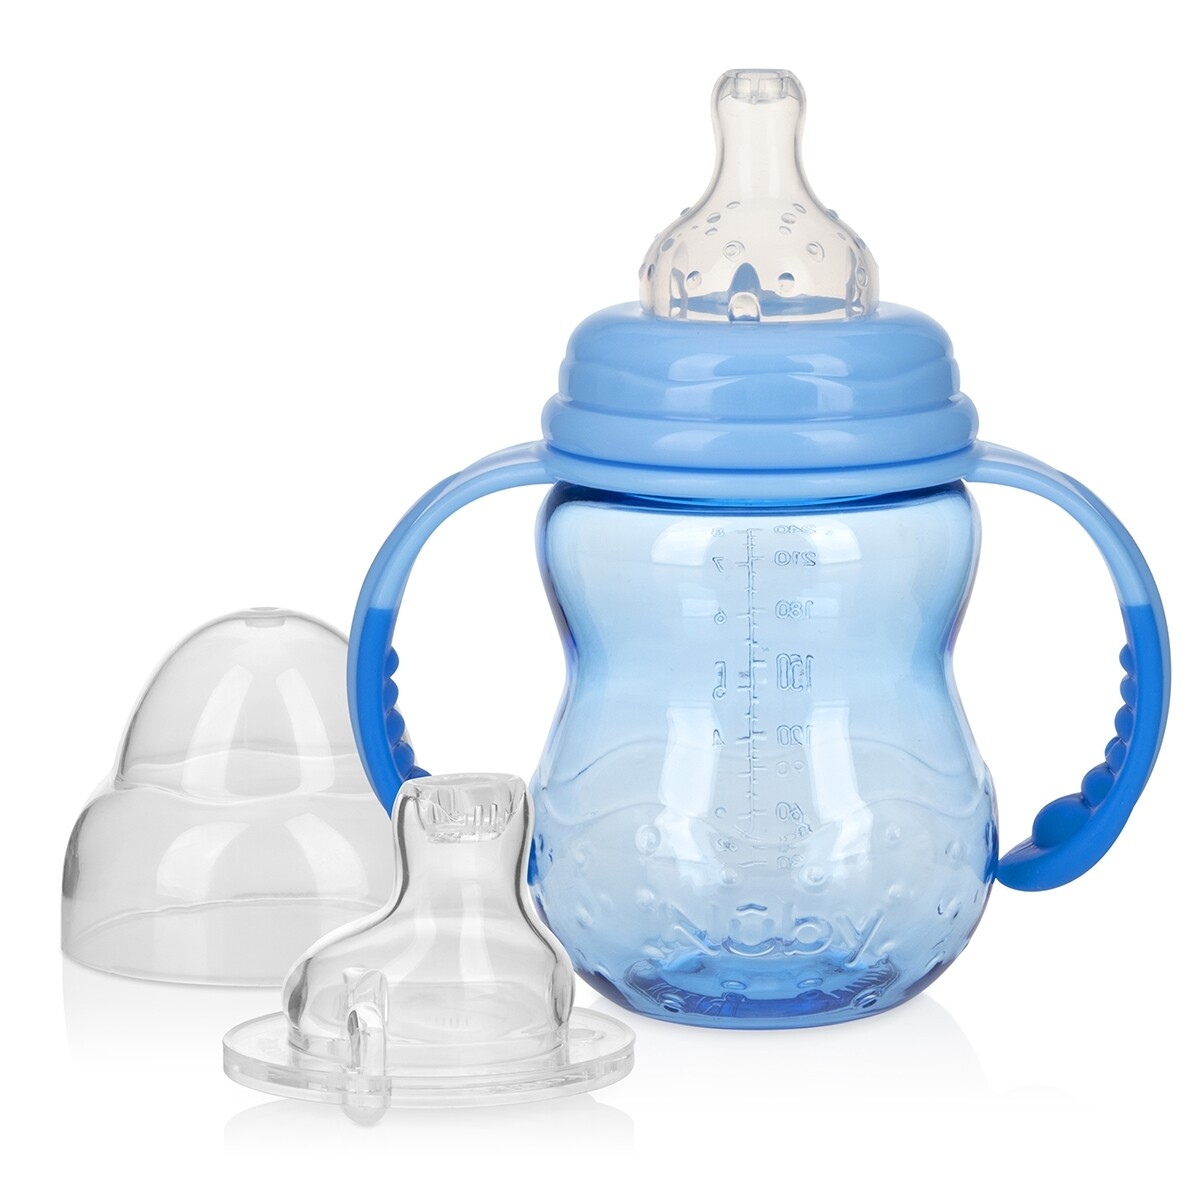 . Case of [24] Nuby? Non-Drip Bottles with Handles - 8 oz, Blue, Stage 3 .